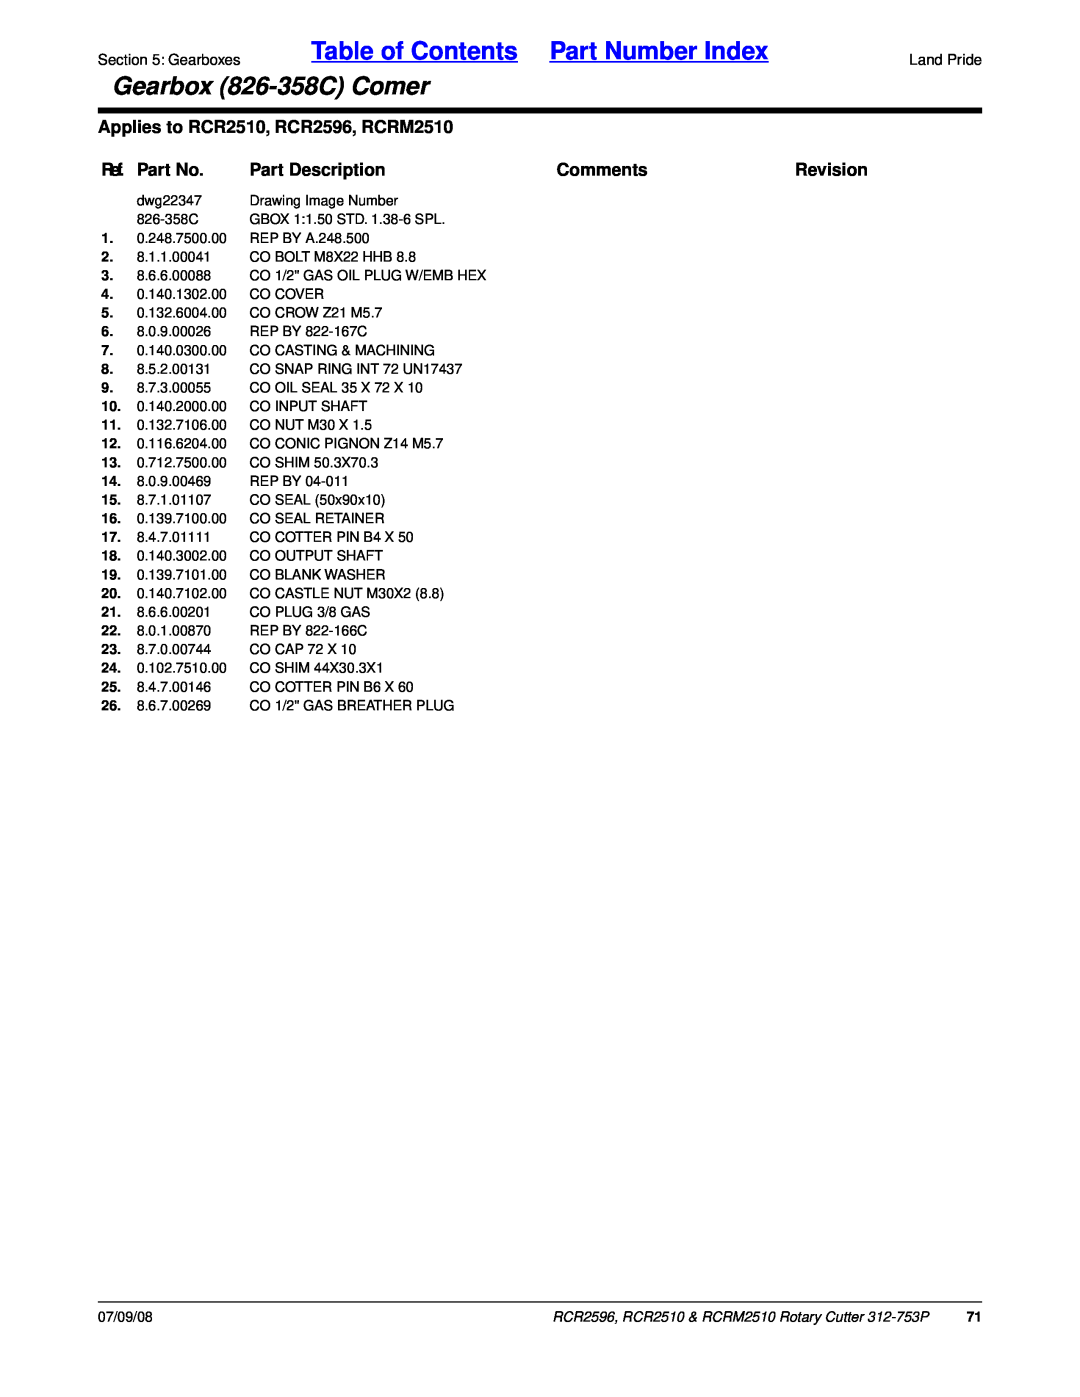 Land Pride Table of Contents Part Number Index, Gearbox 826-358CComer, Applies to RCR2510, RCR2596, RCRM2510, Comments 